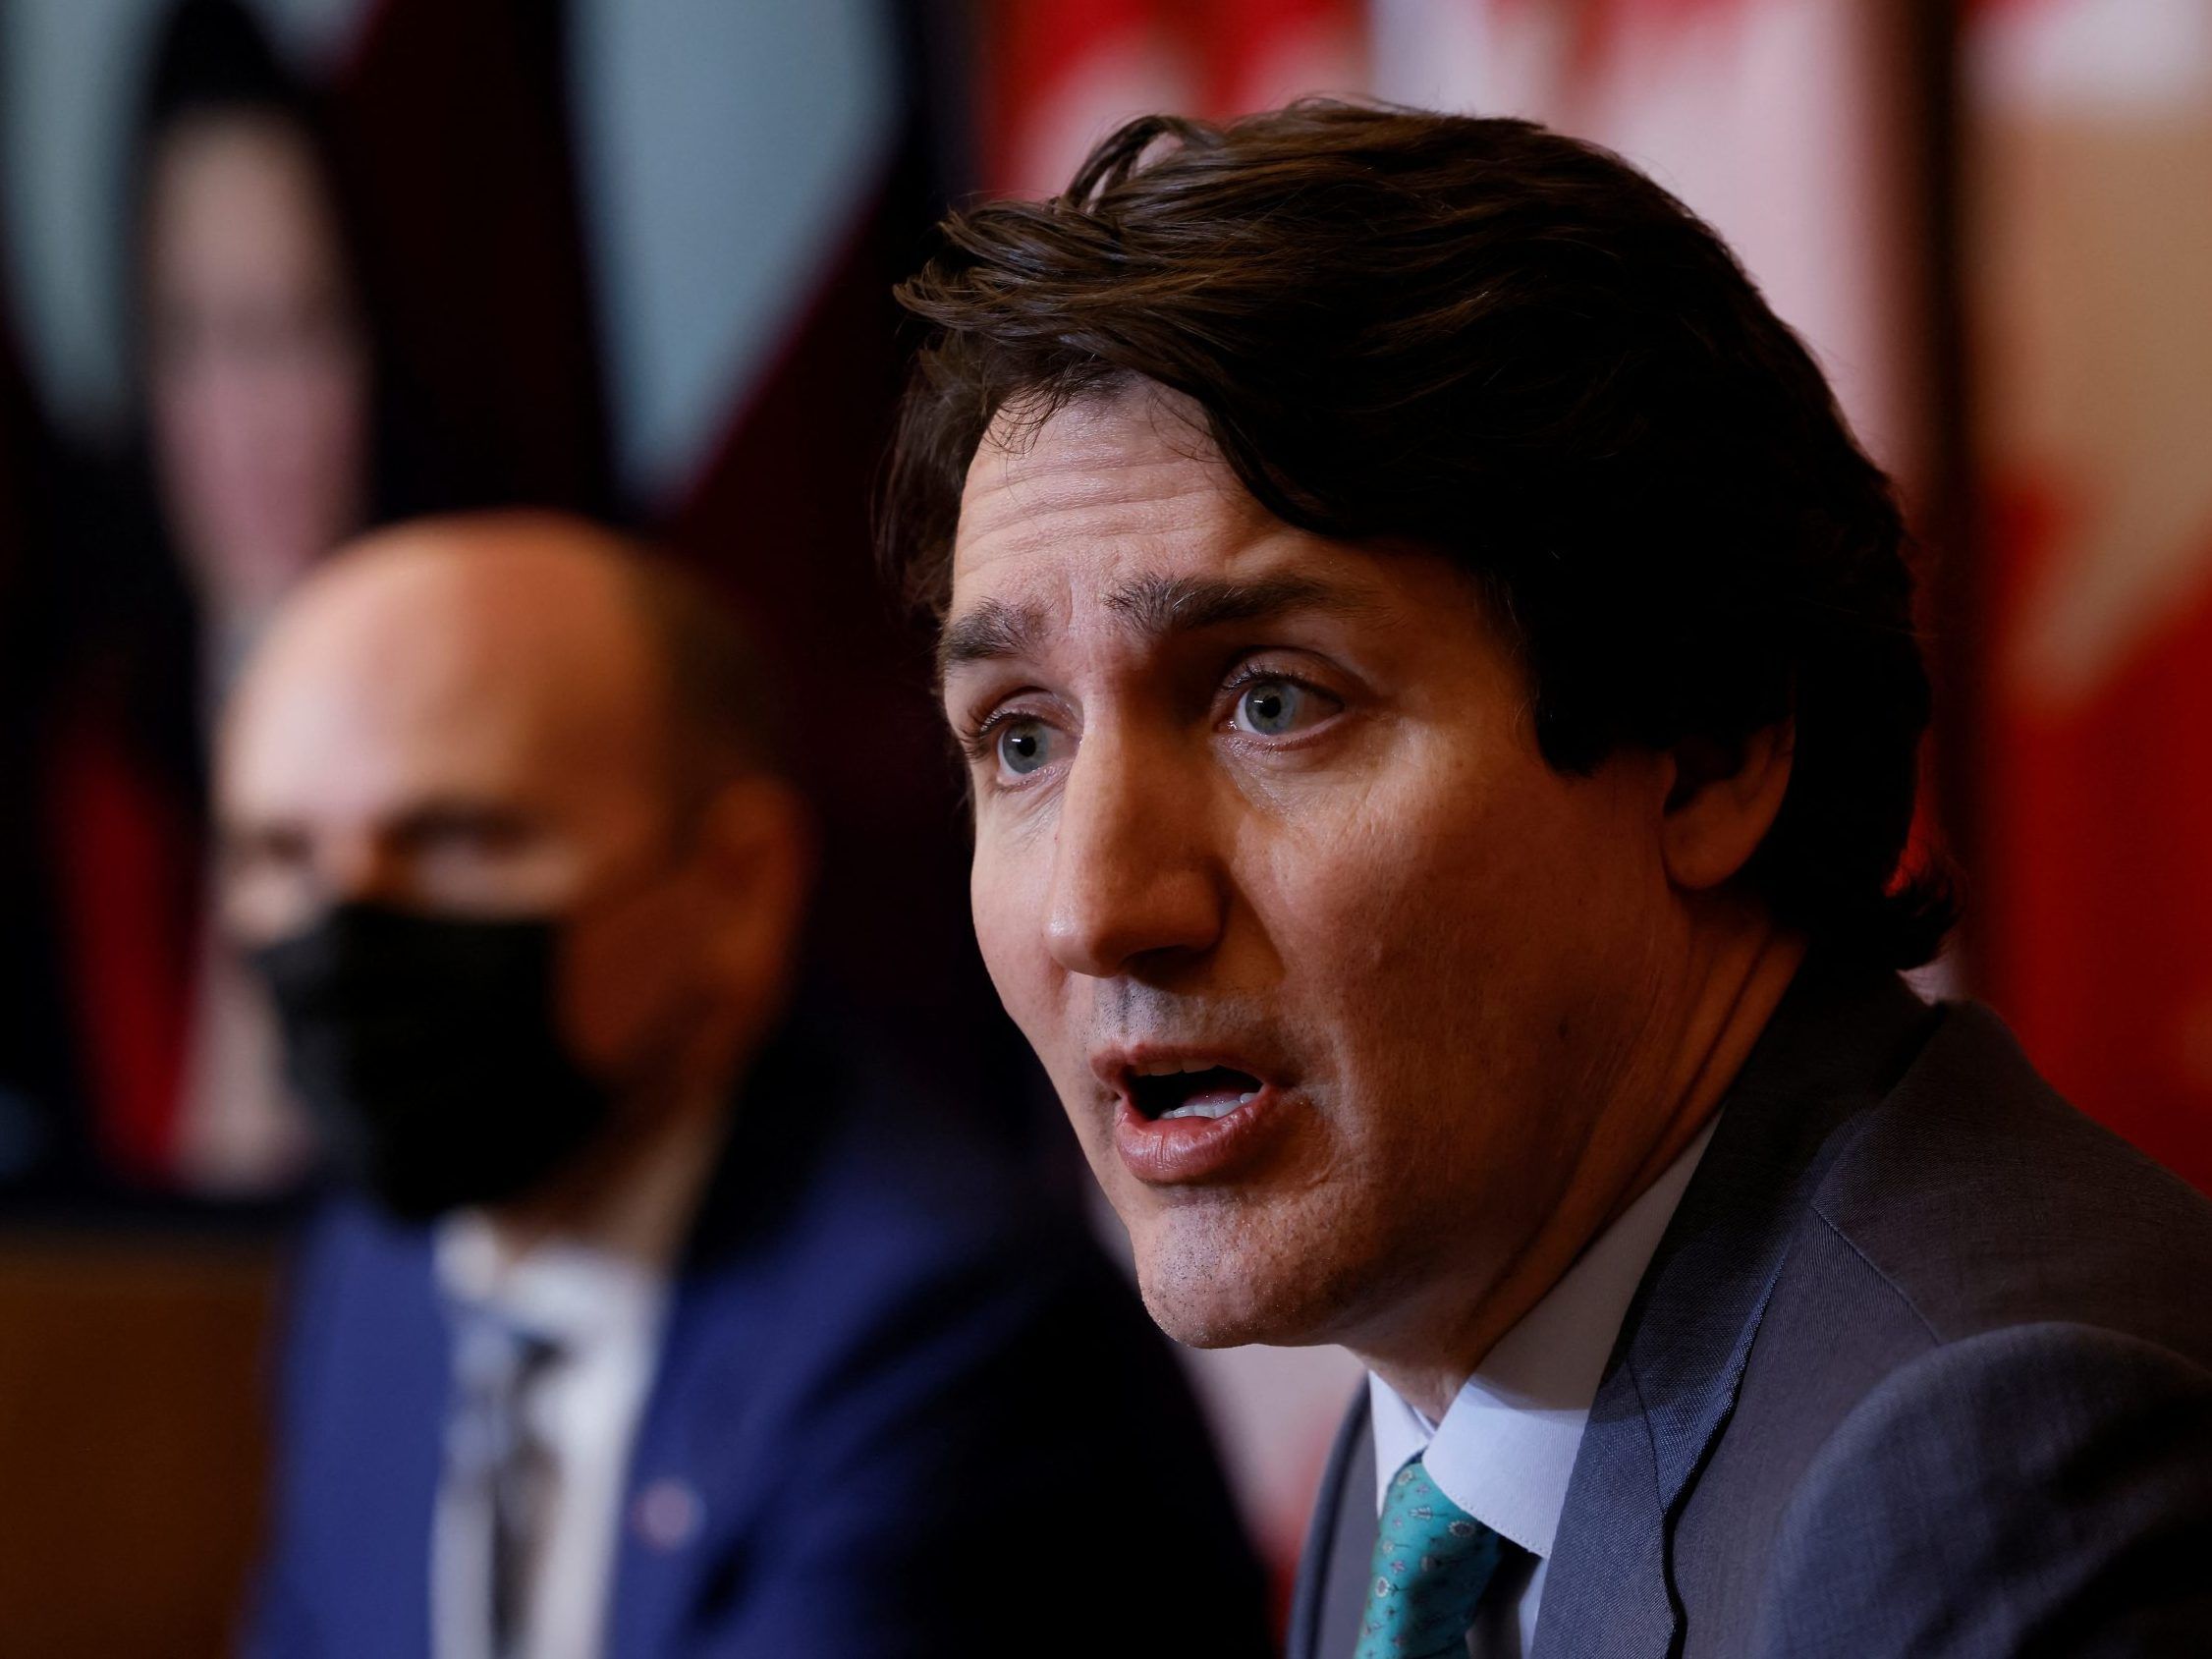 Prime Minister Justin Trudeau, with Minister of Health Jean-Yves Duclos, takes part in a news conference, as the latest Omicron variant emerges as a threat amid the COVID-19 pandemic, in Ottawa, Jan. 5, 2022.